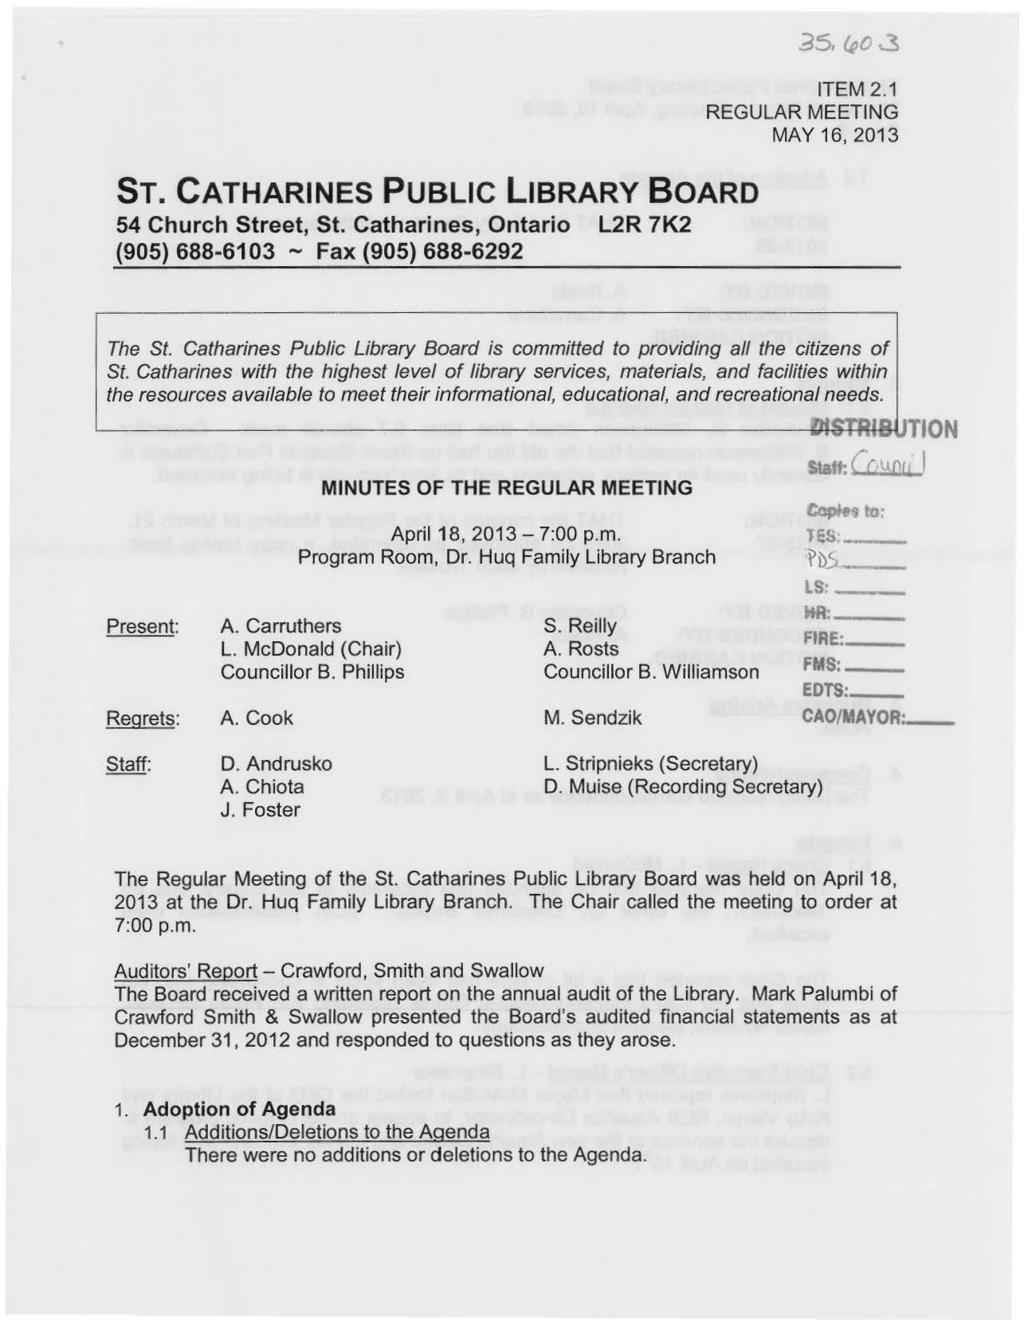 ST. CATHARINES PUBLIC LIBRARY BOARD 54 Church Street, St. Catharines, Ontario L2R 7K2 (905) 688-6103 - Fax (905) 688-6292 ITEM 2.